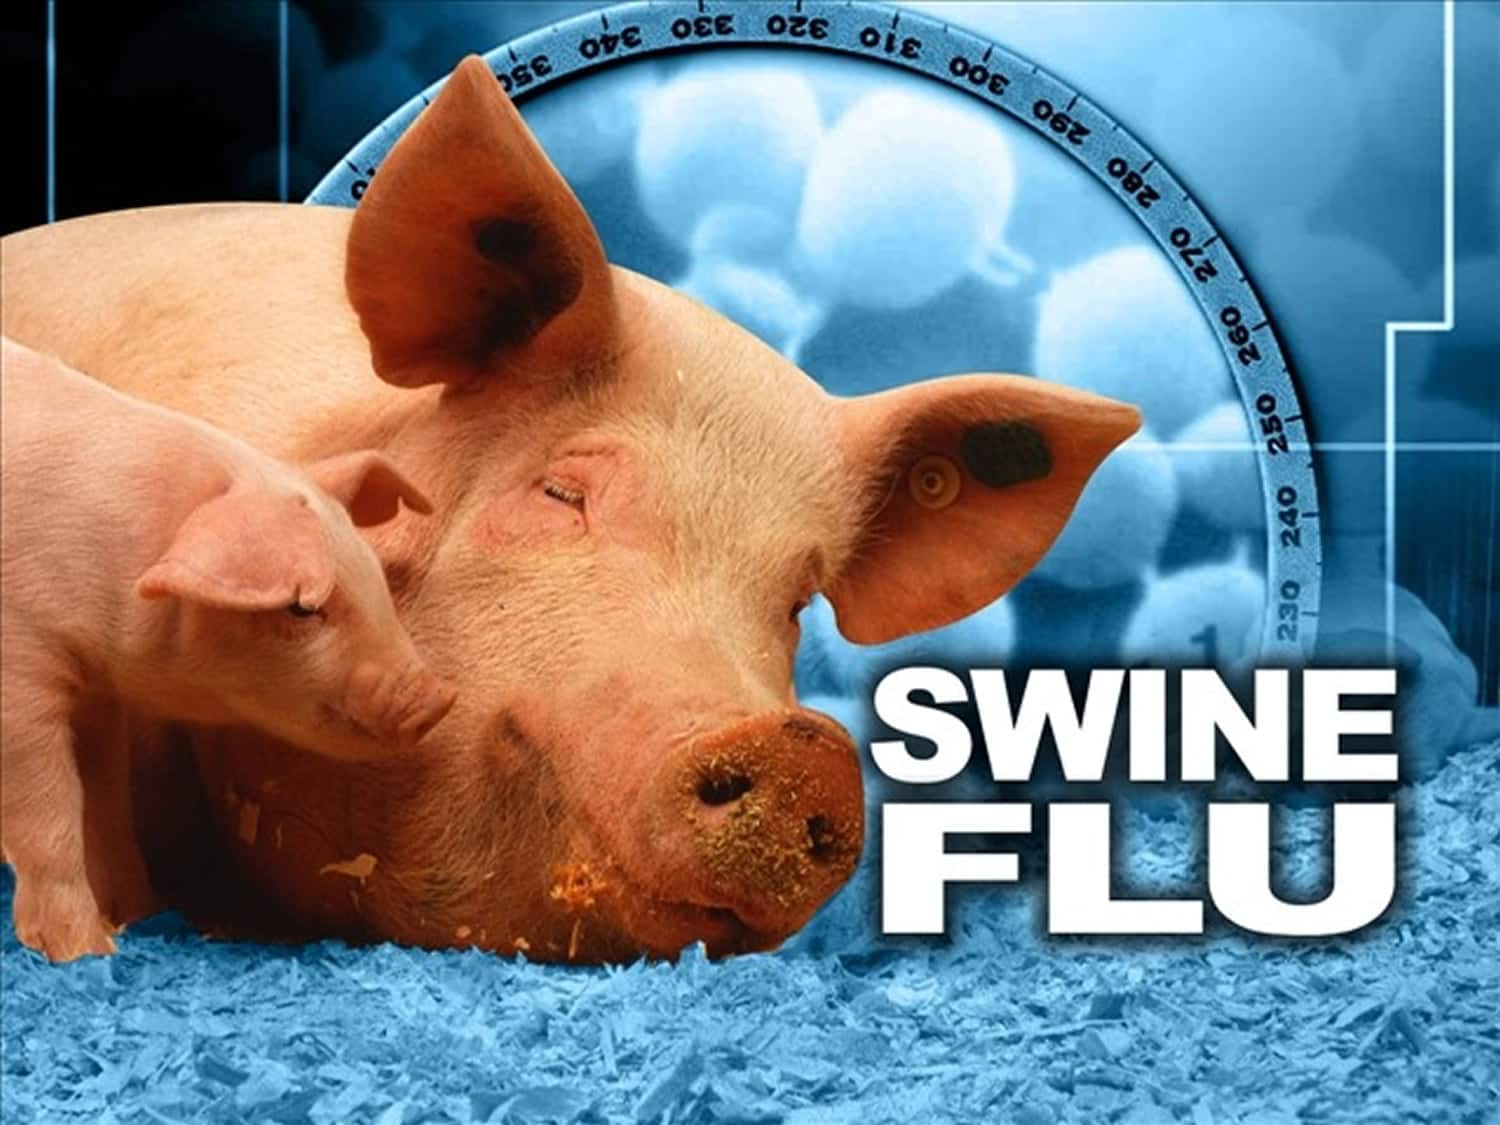 Swine Flu Outbreak In Mumbai: Over 140 H1N1 Cases Reported In 2 Weeks, Pune Tops The List With Maximum Infections